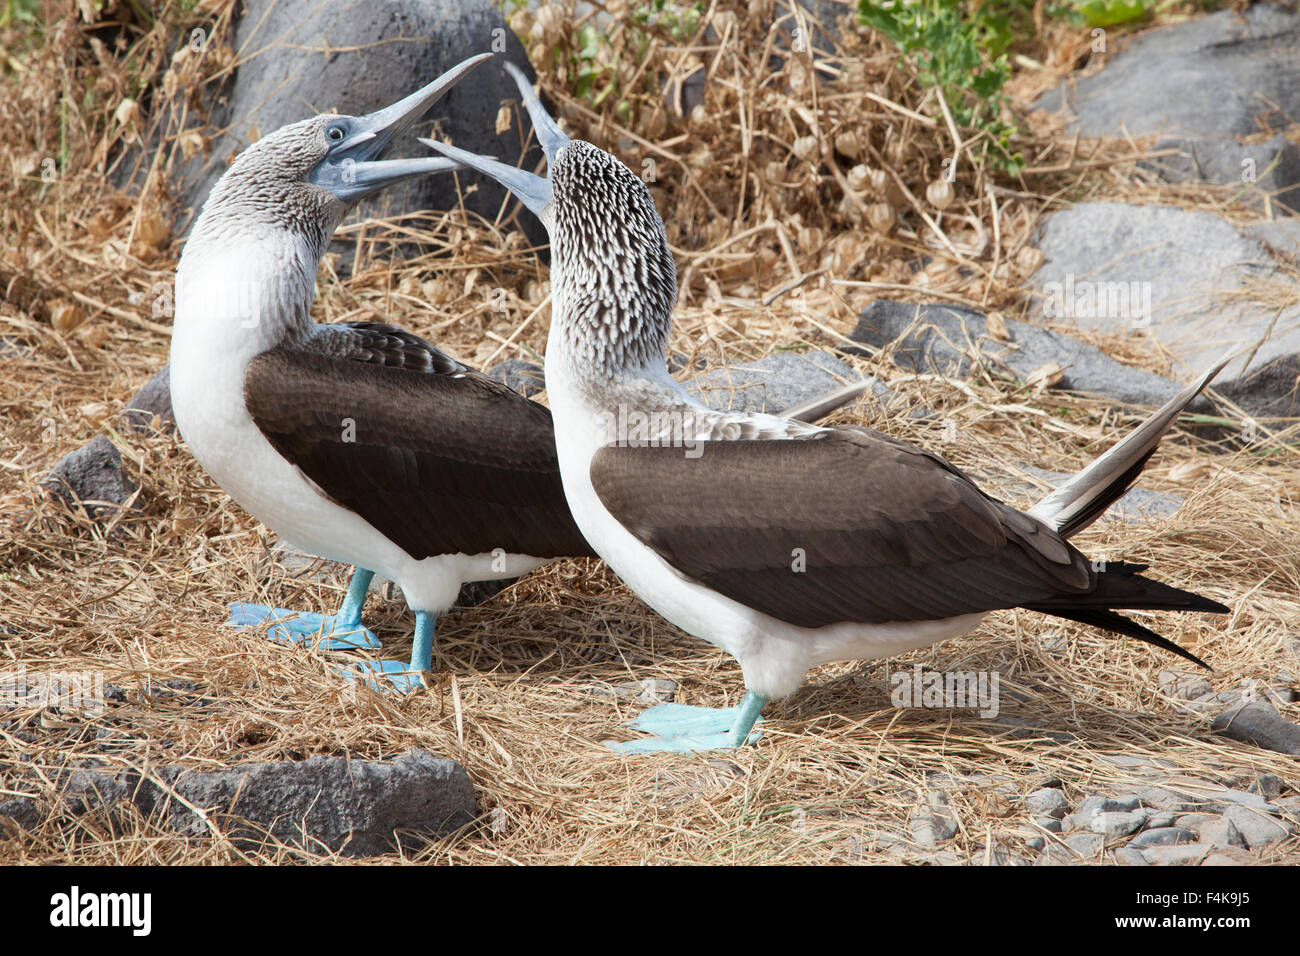 Blue-footed Boobies (Sula nebouxii) courting on Espanola Island in the Galapagos Islands, Ecuador Stock Photo